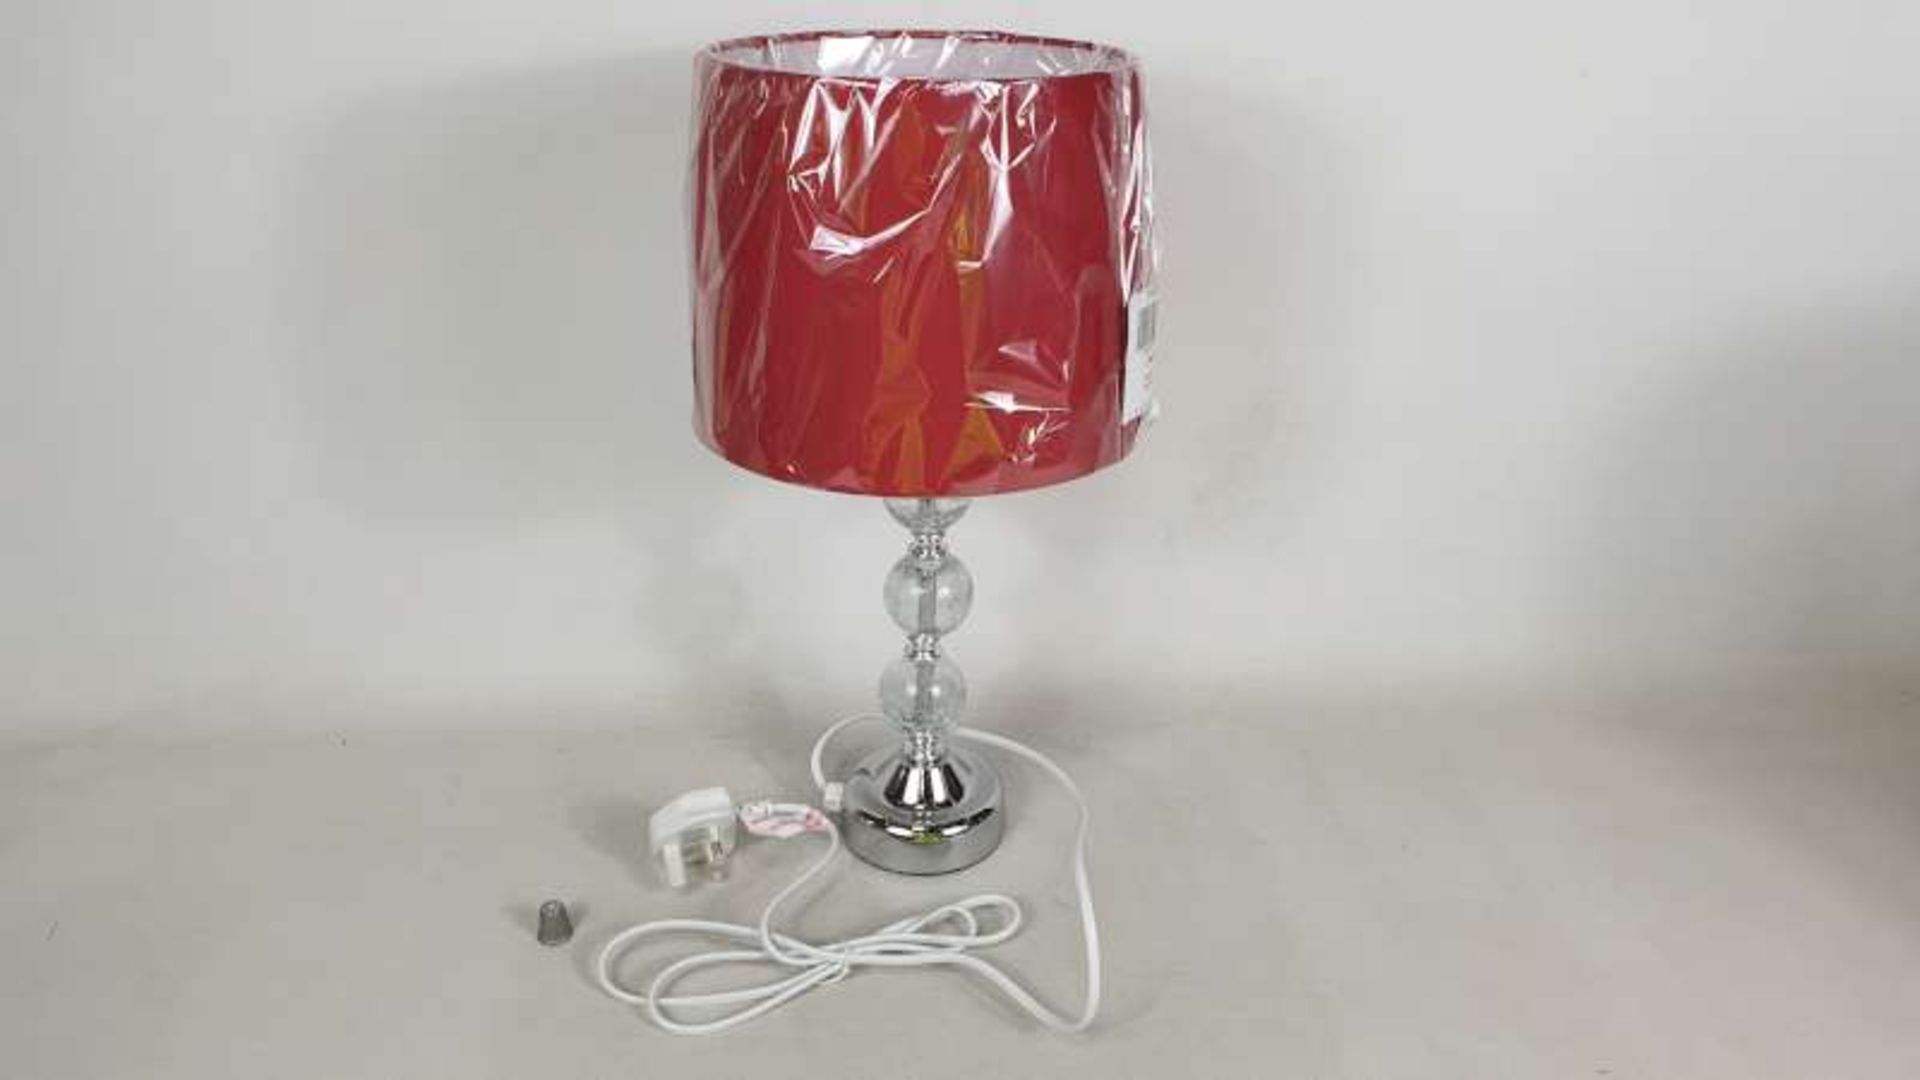 12 X BRAND NEW BOXED CRACKLE GLASS BALL TOUCH TABLE LAMP WITH RED COLOURED SHADE IN 2 BOXES